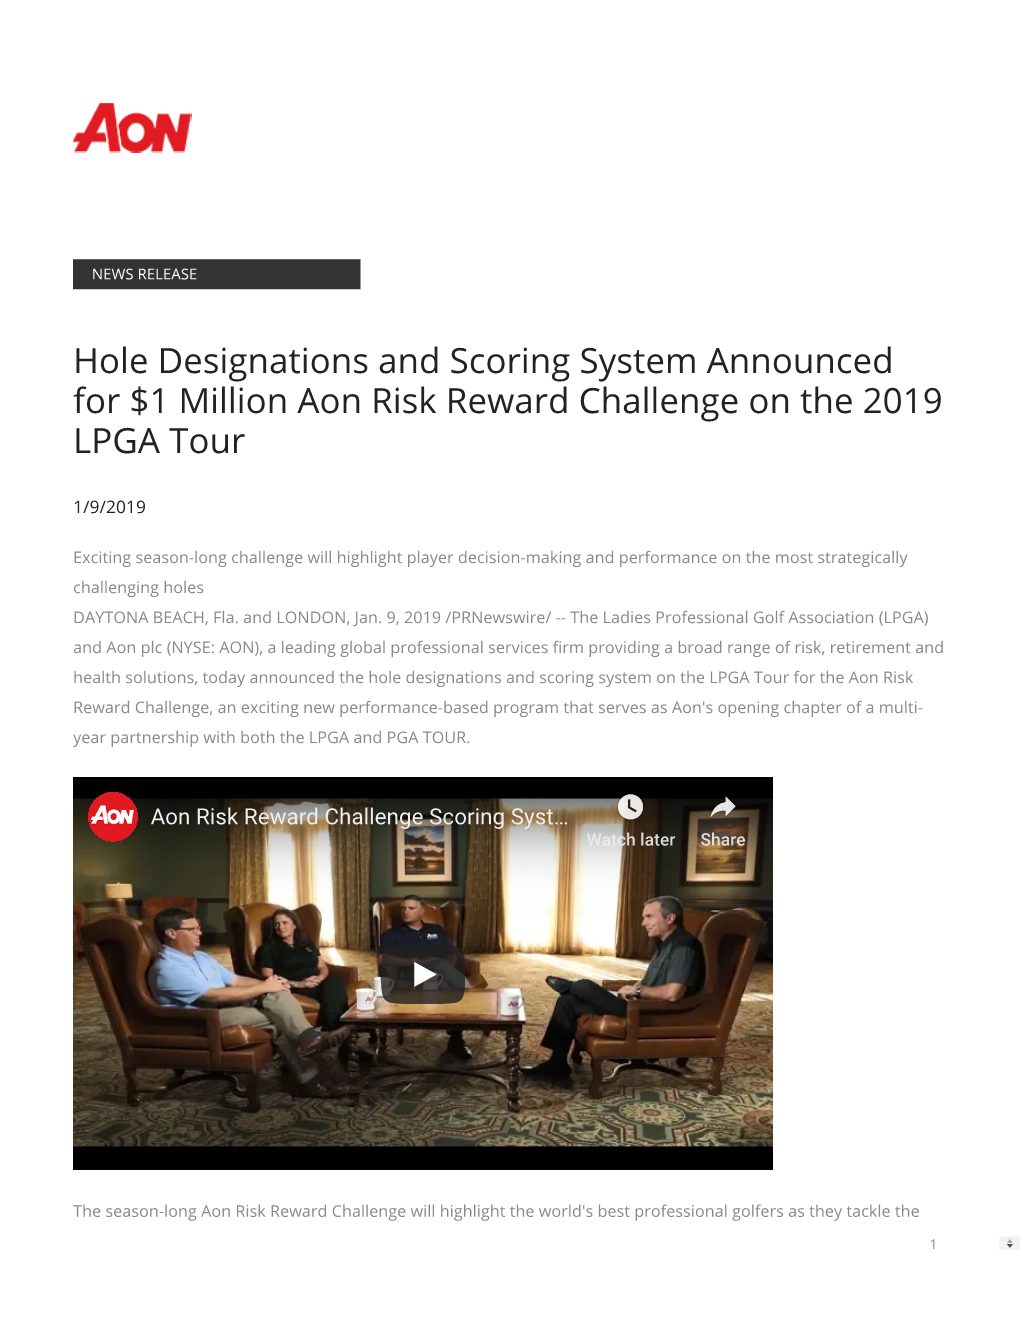 Hole Designations and Scoring System Announced for $1 Million Aon Risk Reward Challenge on the 2019 LPGA Tour